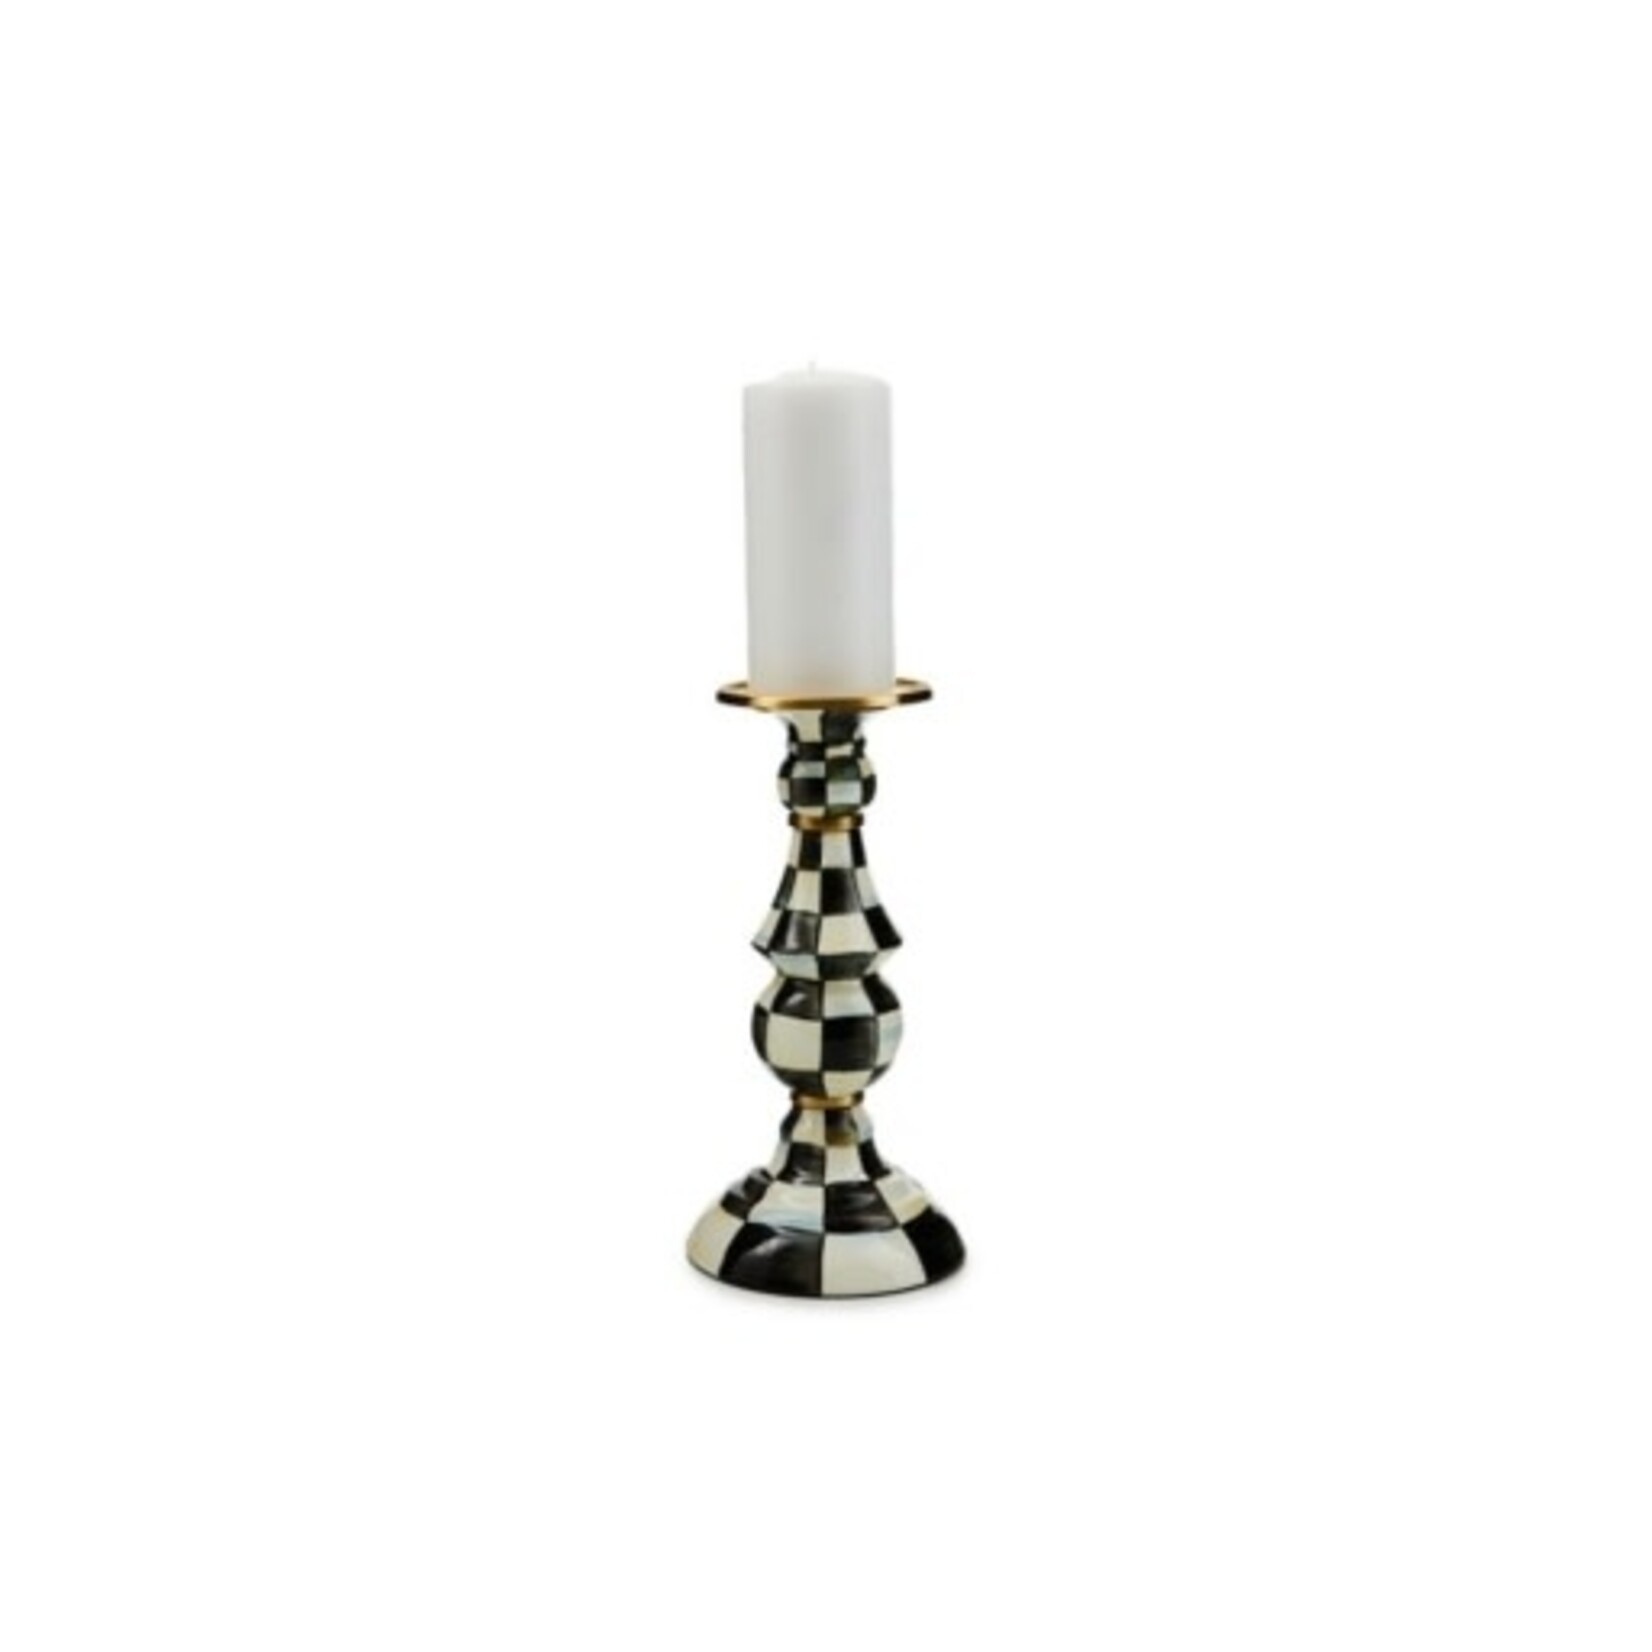 MacKenzie-Childs Courtly Check Large Pillar Candlestick